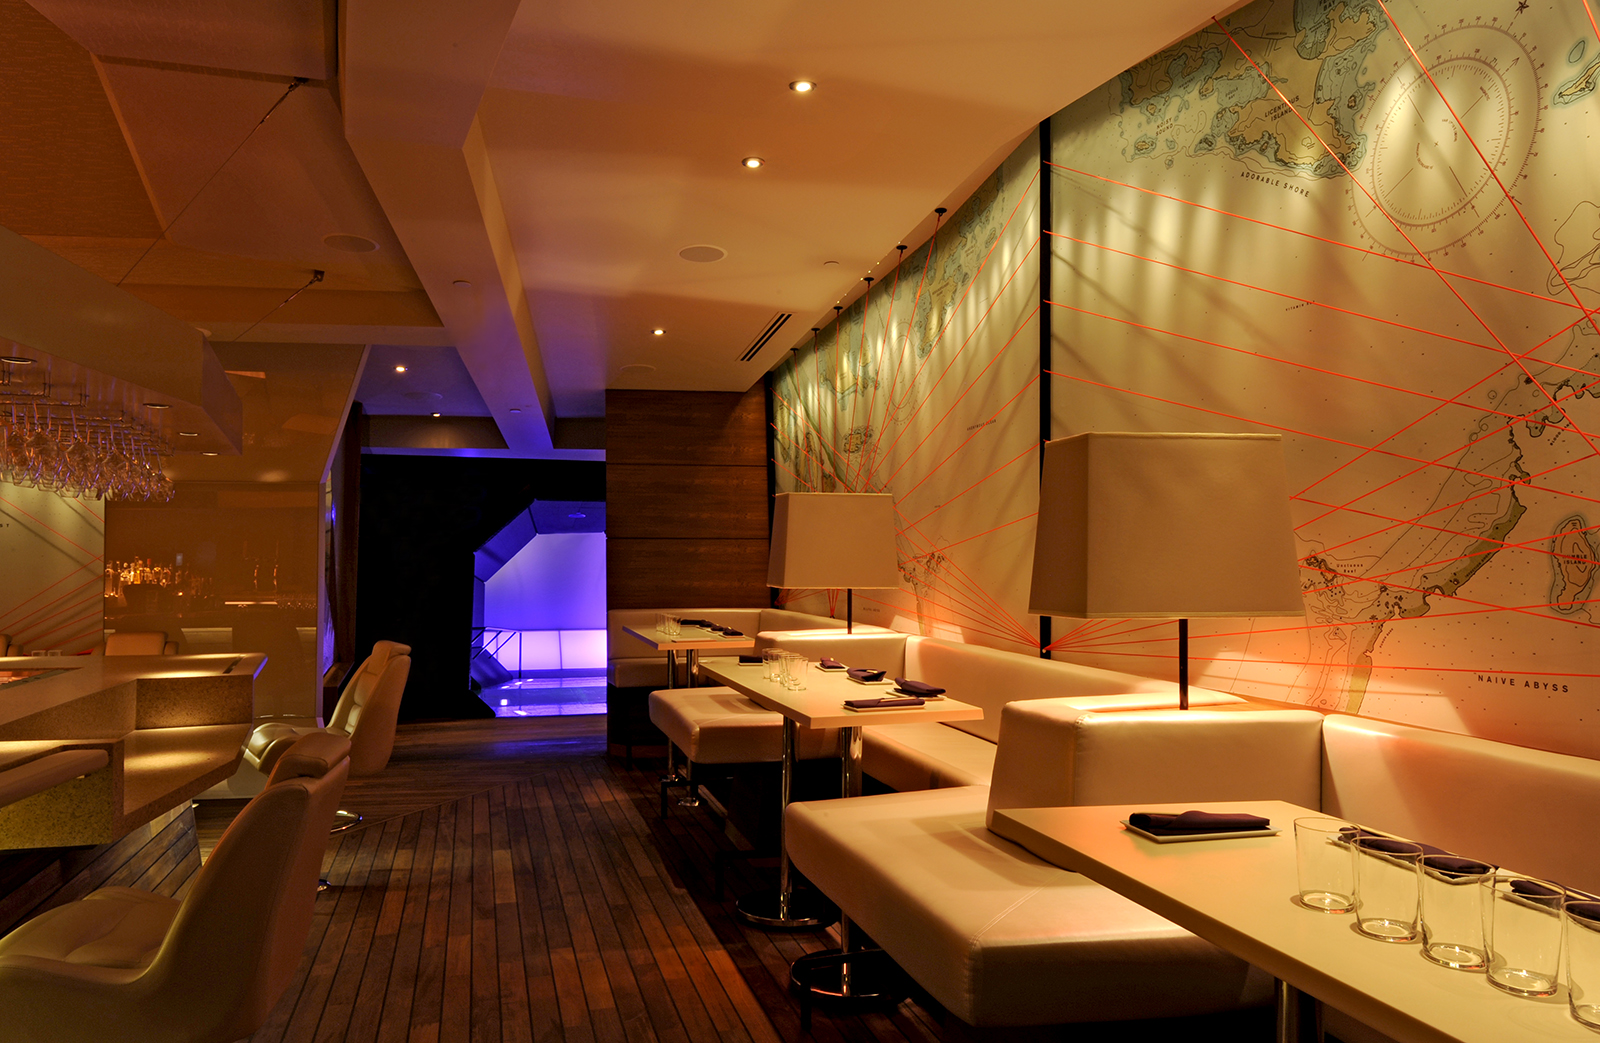 The dining room with light-colored leather booths, dark wood, and the fanciful nautical maps filling the walls.